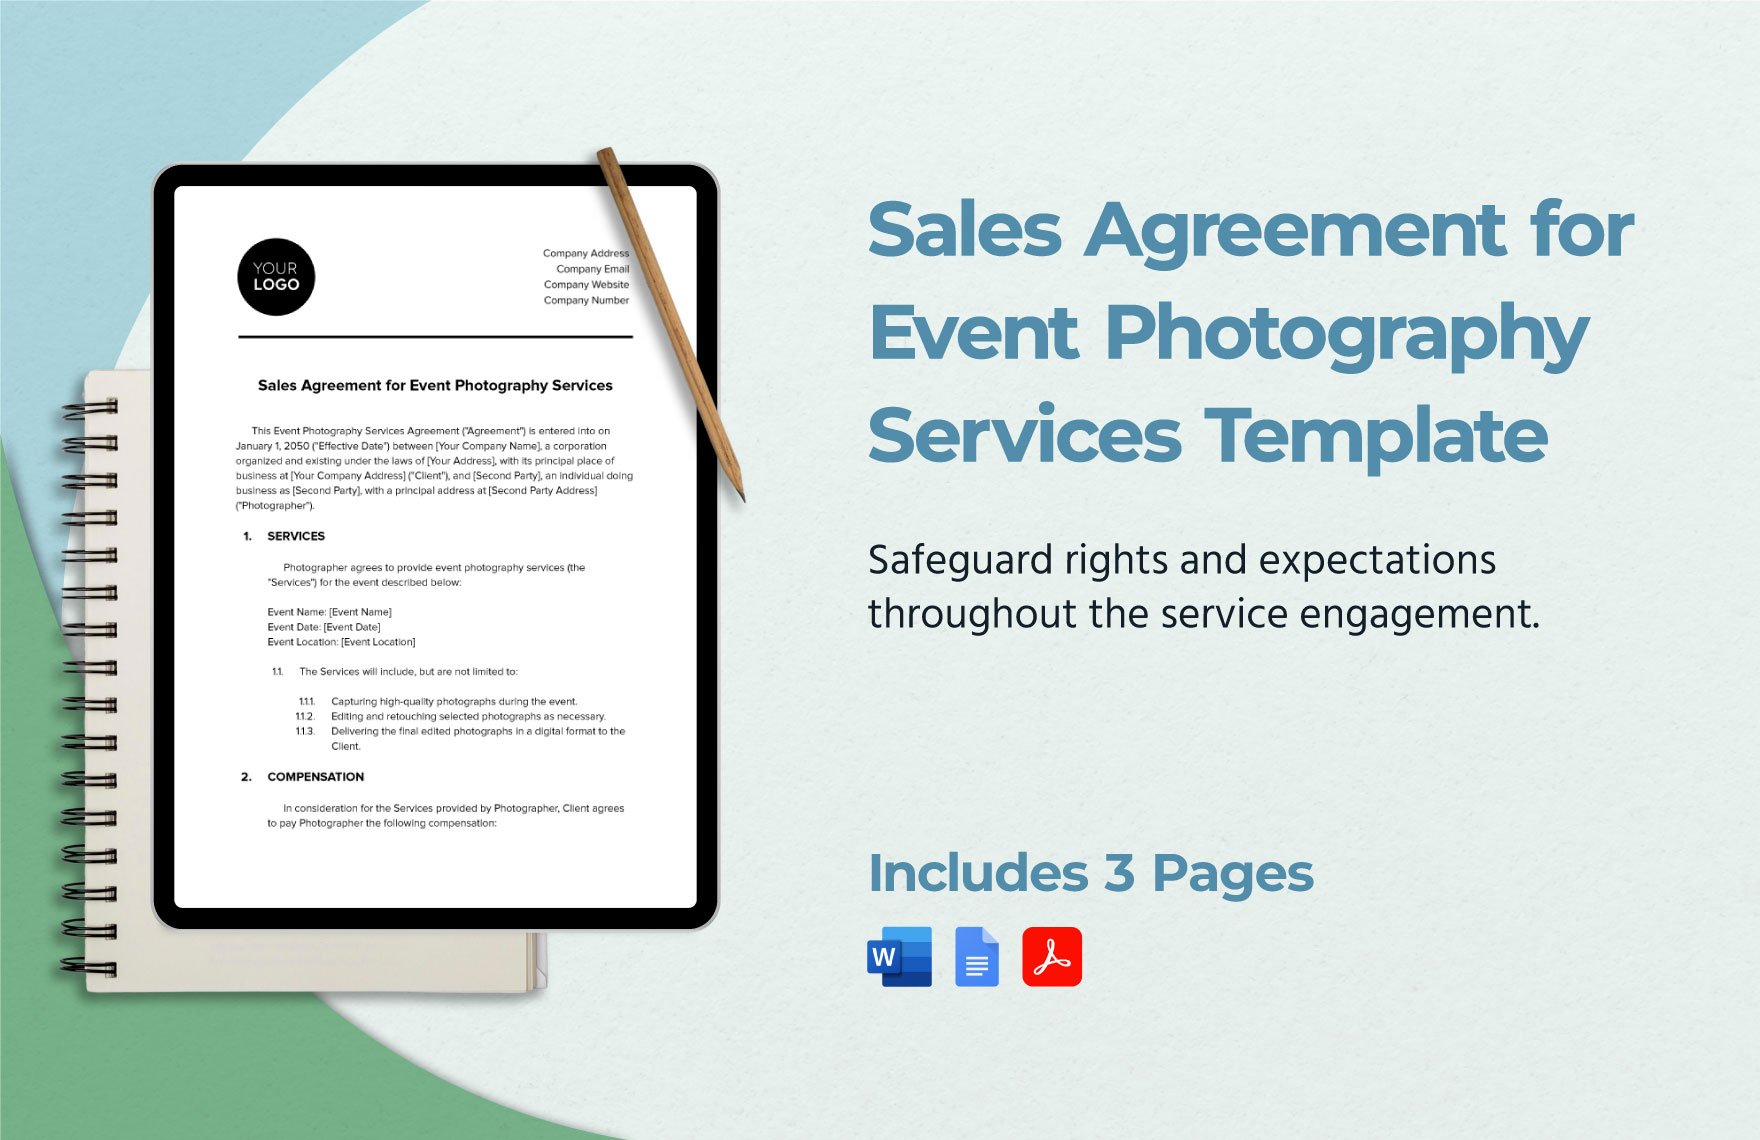 Sales Agreement for Event Photography Services Template